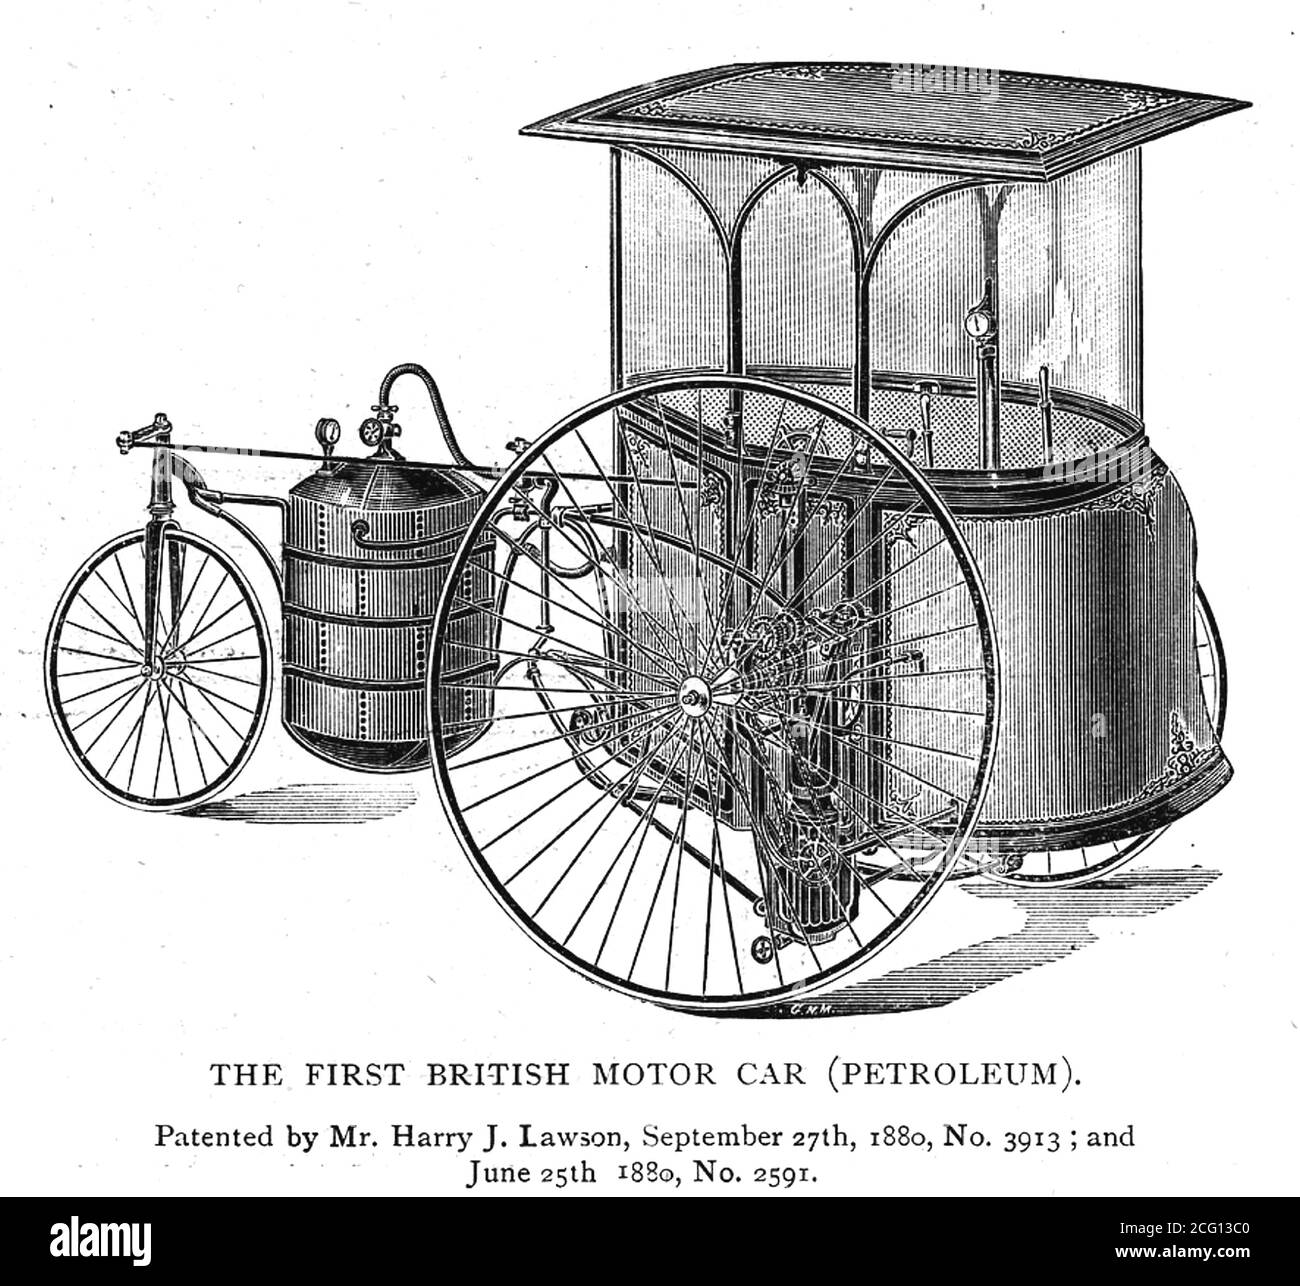 HENRY (aka Harry) JOHN LAWSON (1852-1925)  English  engineer and pioneer designer of bicycles and this  patented design for the first British petrol driven motor car. He was also a convicted fraudster. Stock Photo